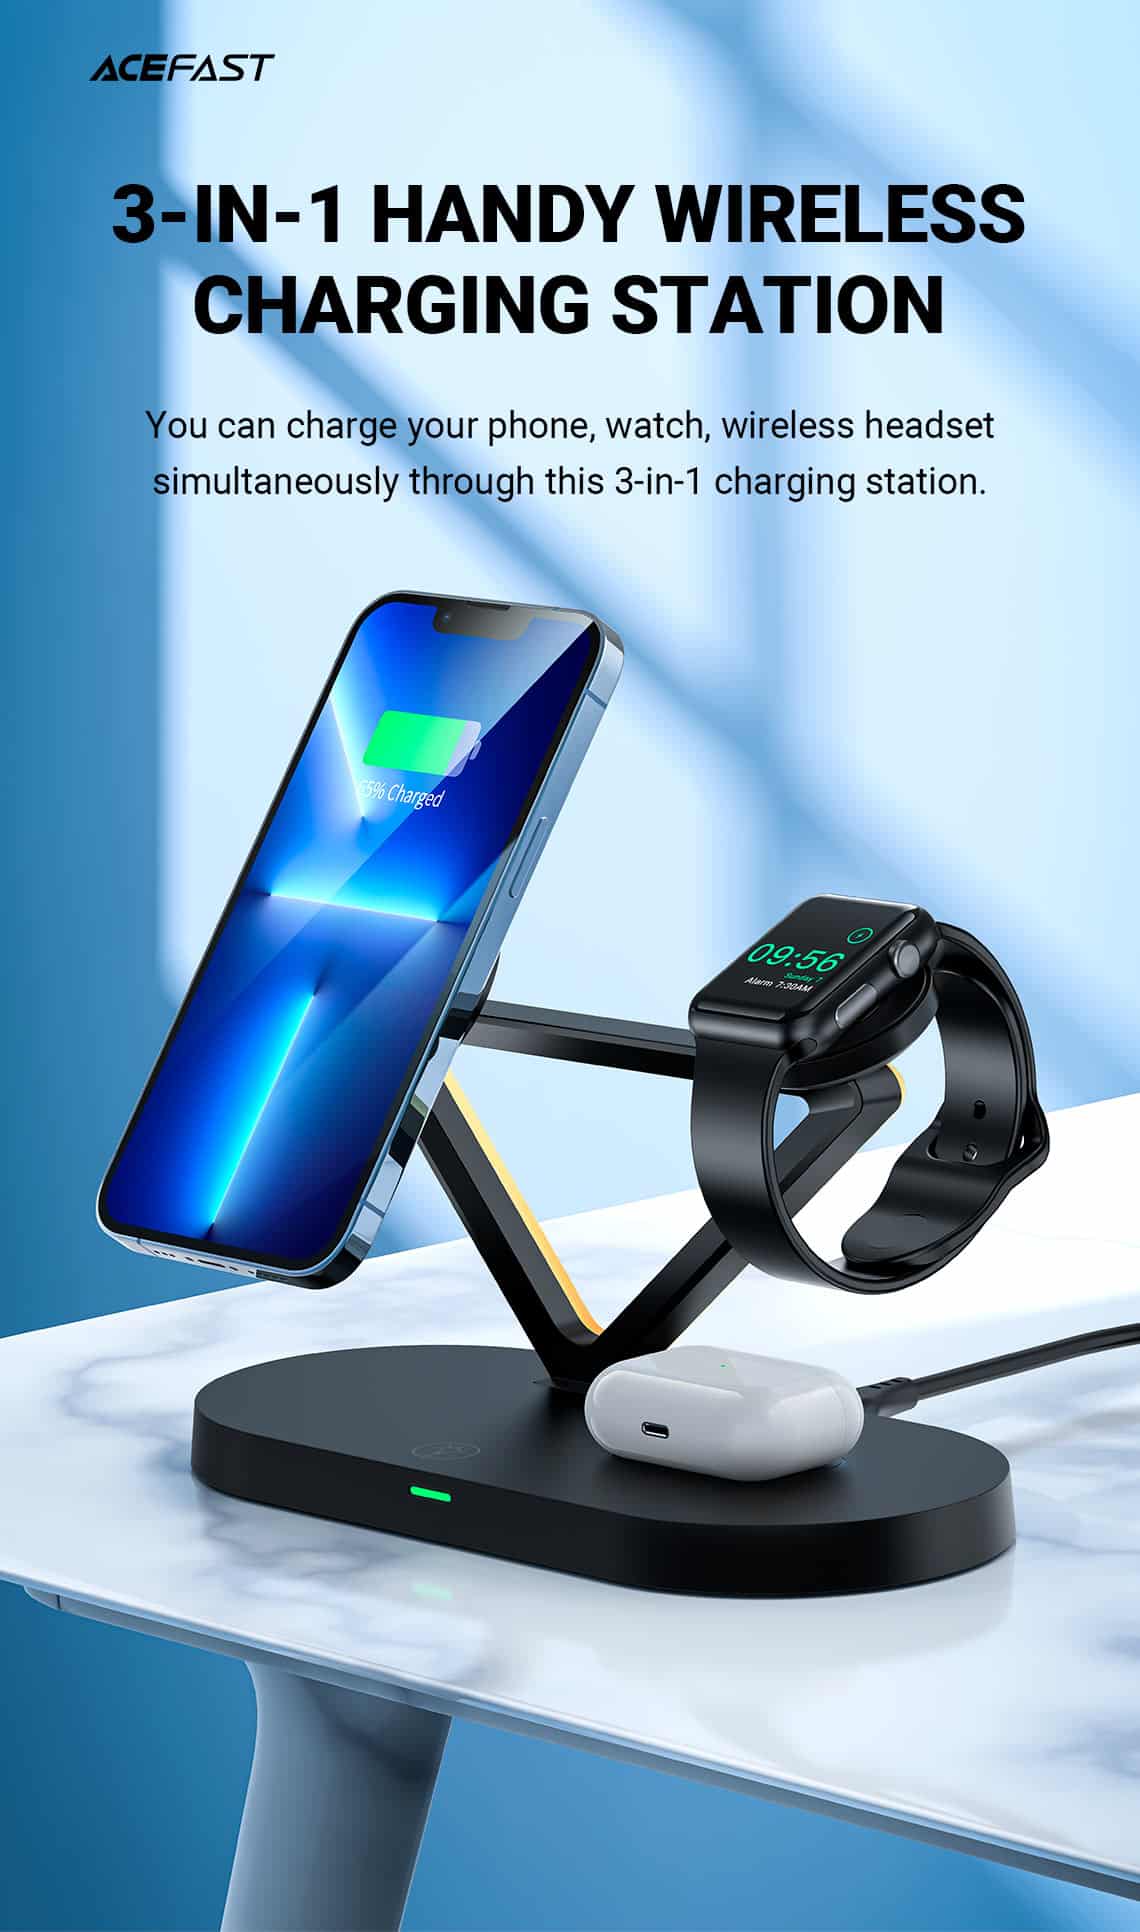 ACEFAST AIRCHARGE E9 45W 3 in 1 Desktop Wireless Charger 6